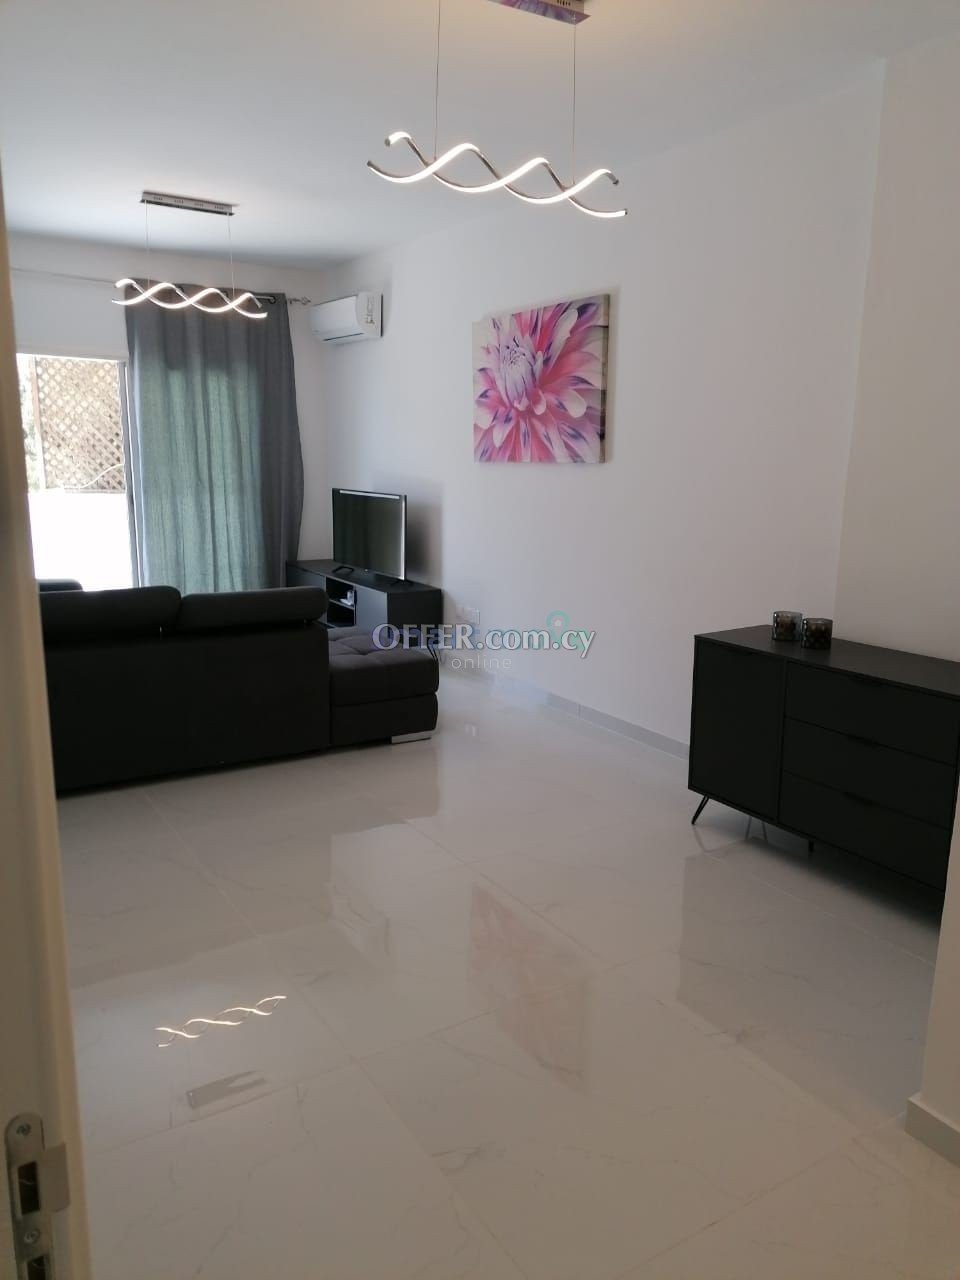 3 Bedroom Beach Front Apartment For Sale Limassol - 1